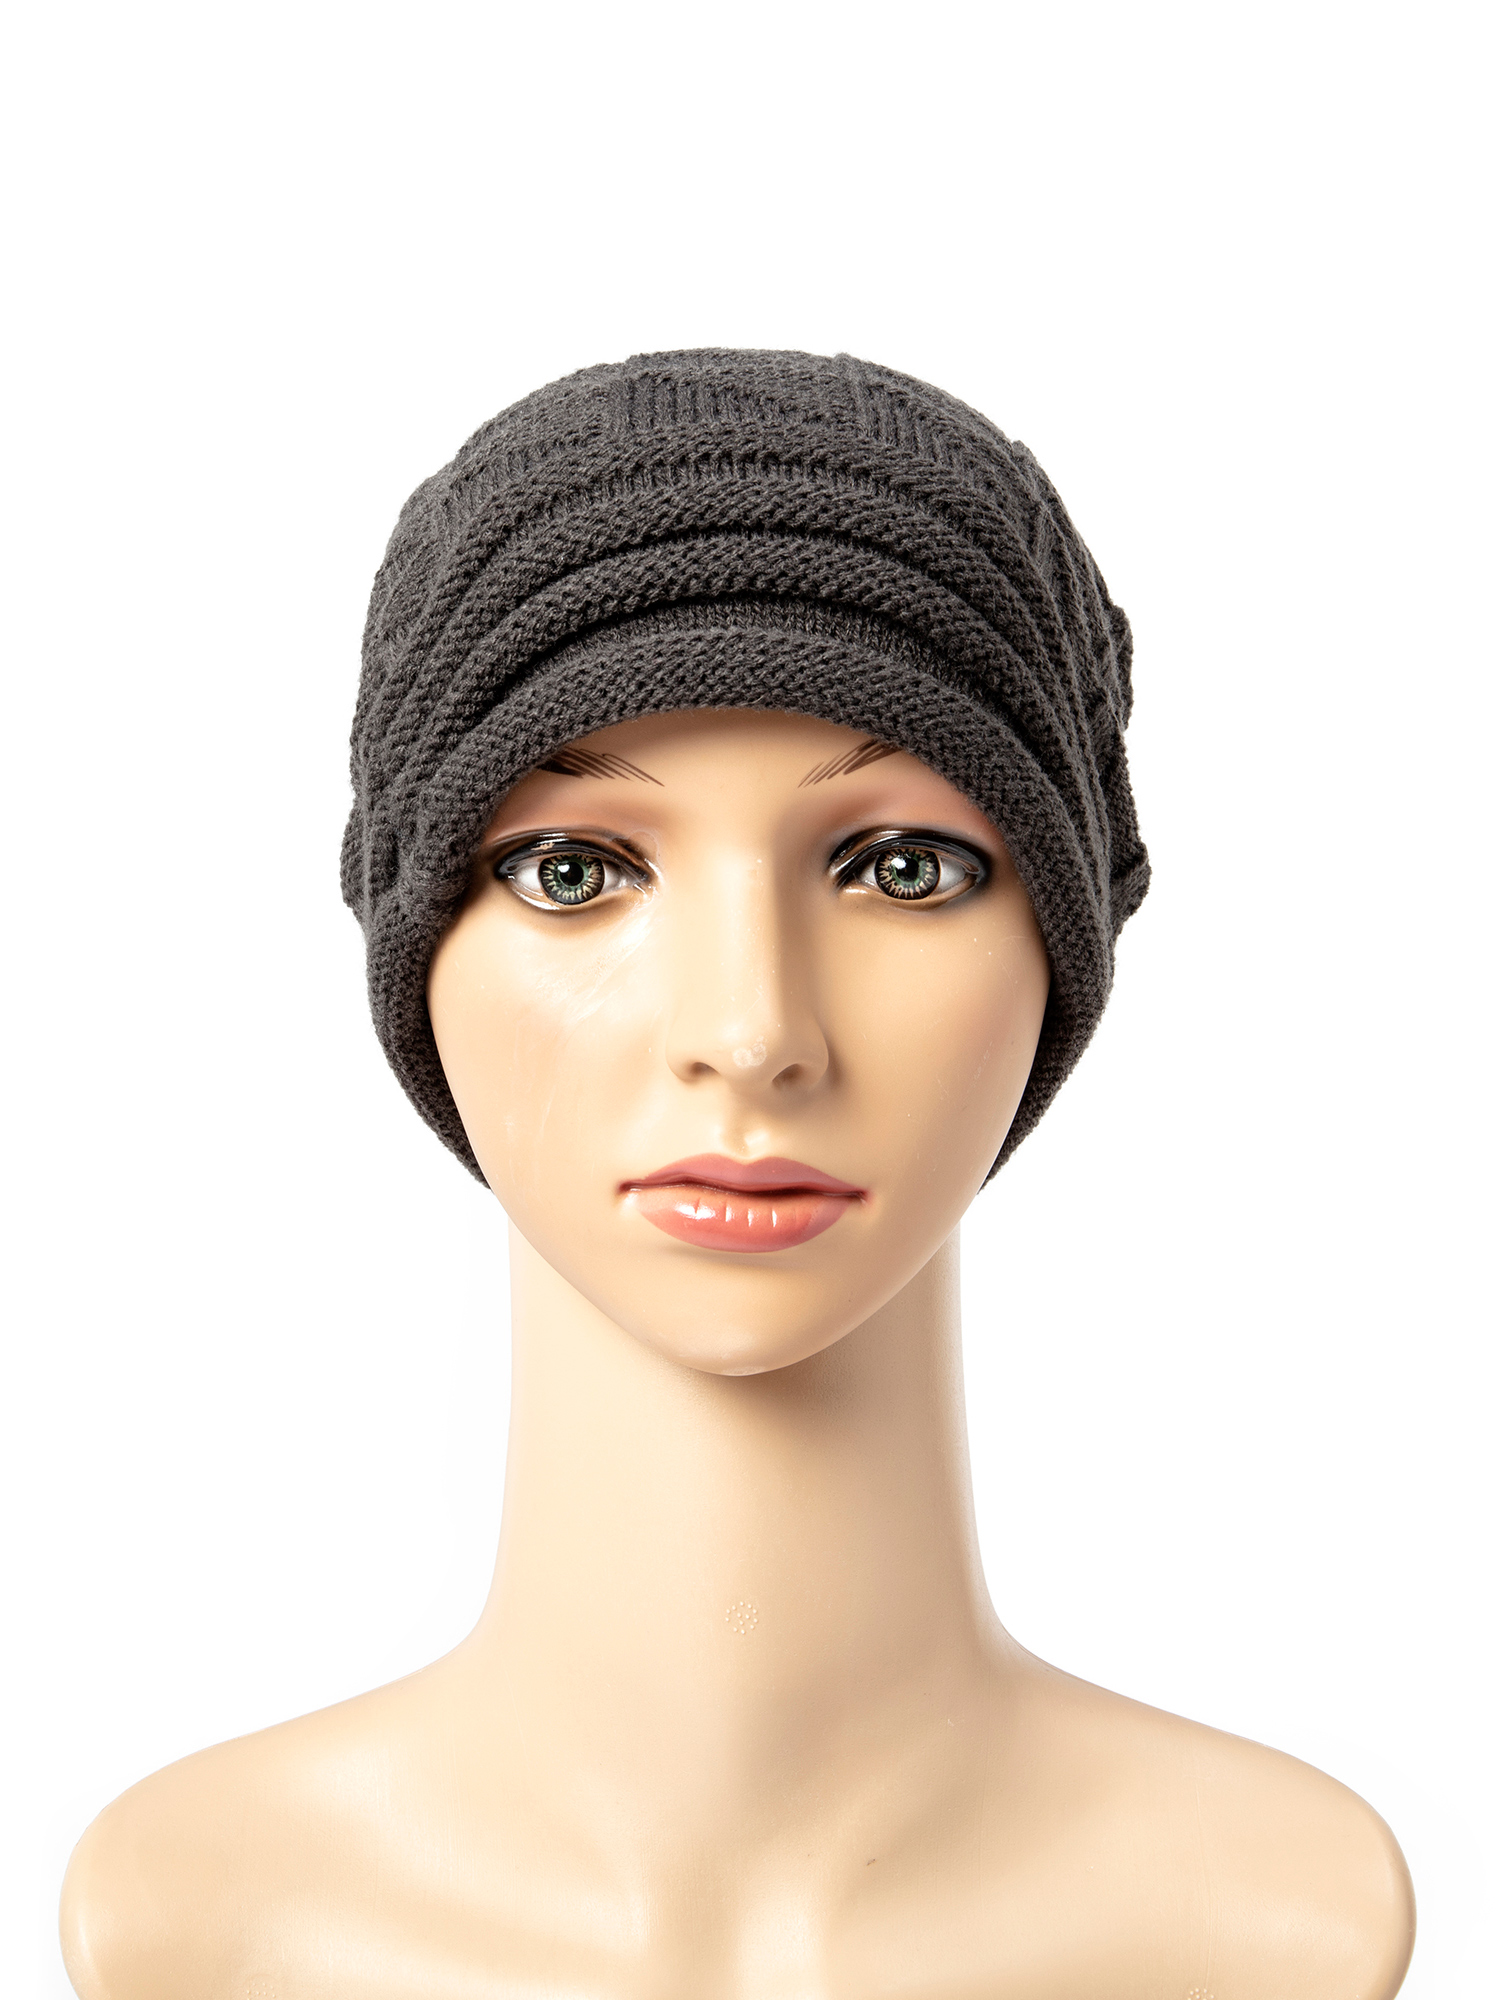 SAYFUT Girls Winter Beanie Hats Warm Knit Hat Thick Knit Skull Cap Oversize Baggy Slouchy Beanie Warm Winter Hat Stocking Cap For Women - image 4 of 8